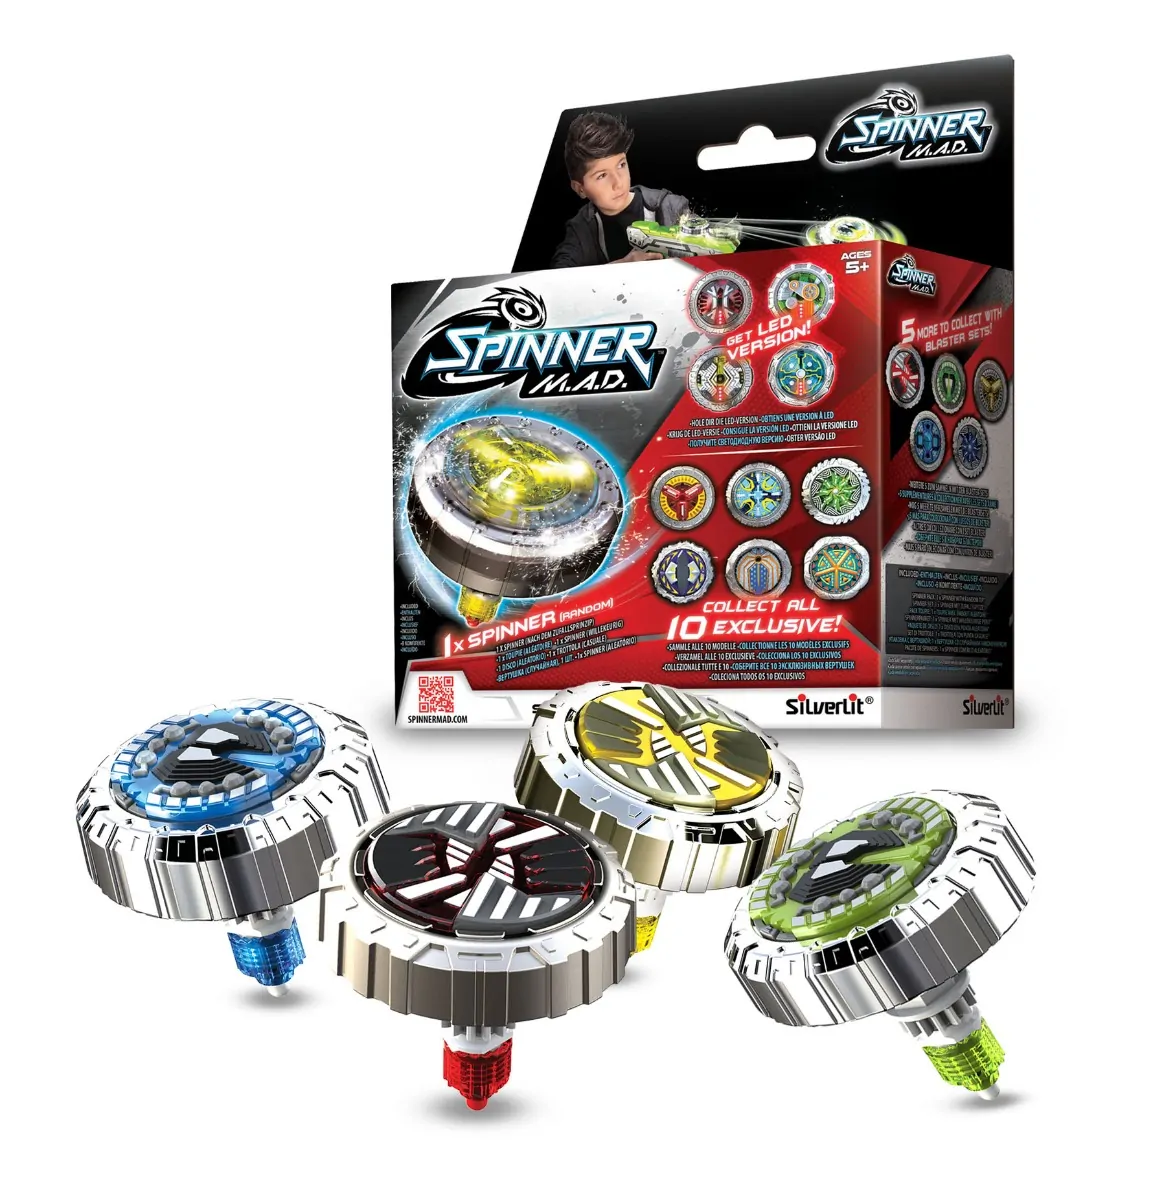 Pack Assorted Launching Includes 1 Spinner With LED Version JK Spinner M.A.D 